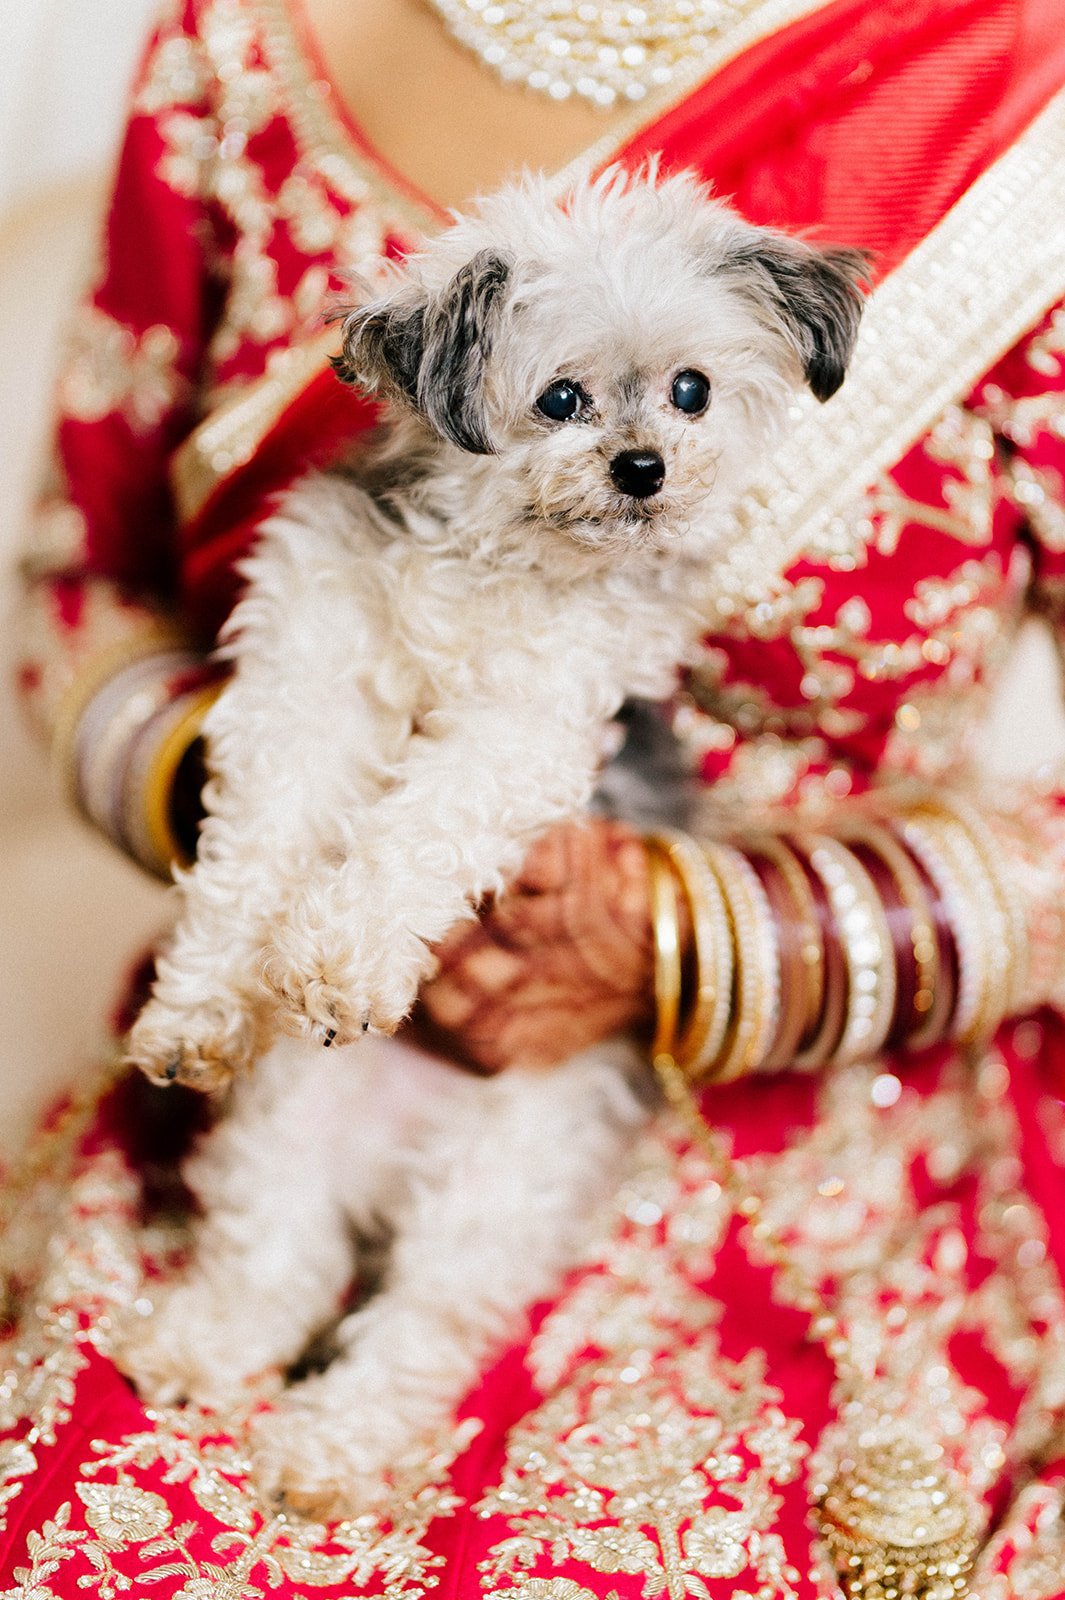 A bride clutches her very old white dog on her wedding morning.